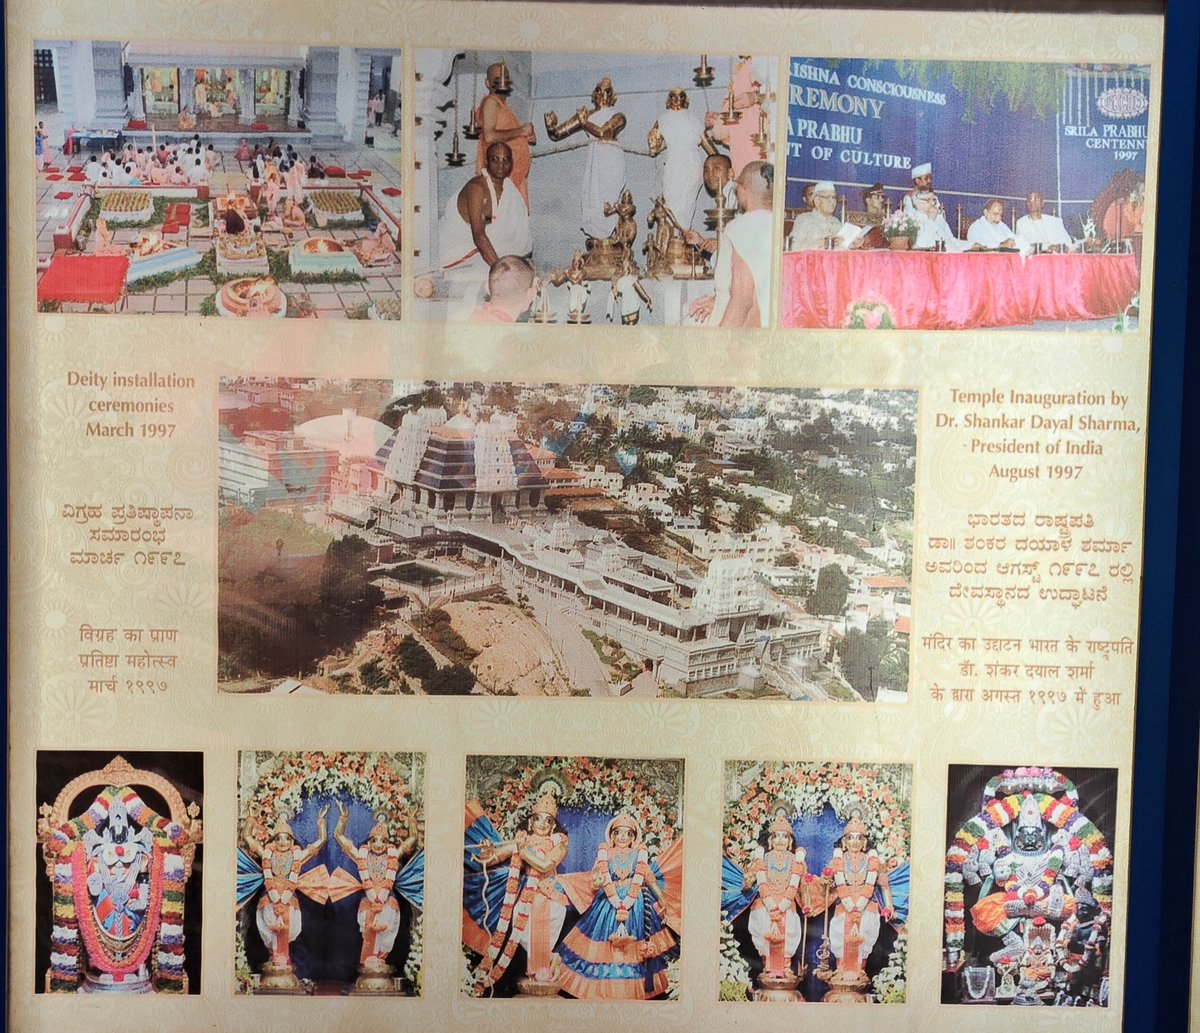 Once upon a time, a hill in Mahalakshmi Layout in Bengaluru, was discarded as 'kharaab land'. Then some magic happened.

Within no time CM Ramakrishna Hegde was there doing puja. By 1997, a grand ISKCON temple was there.

Today, millions visit each year!
#HareKrishna 
#HareRama